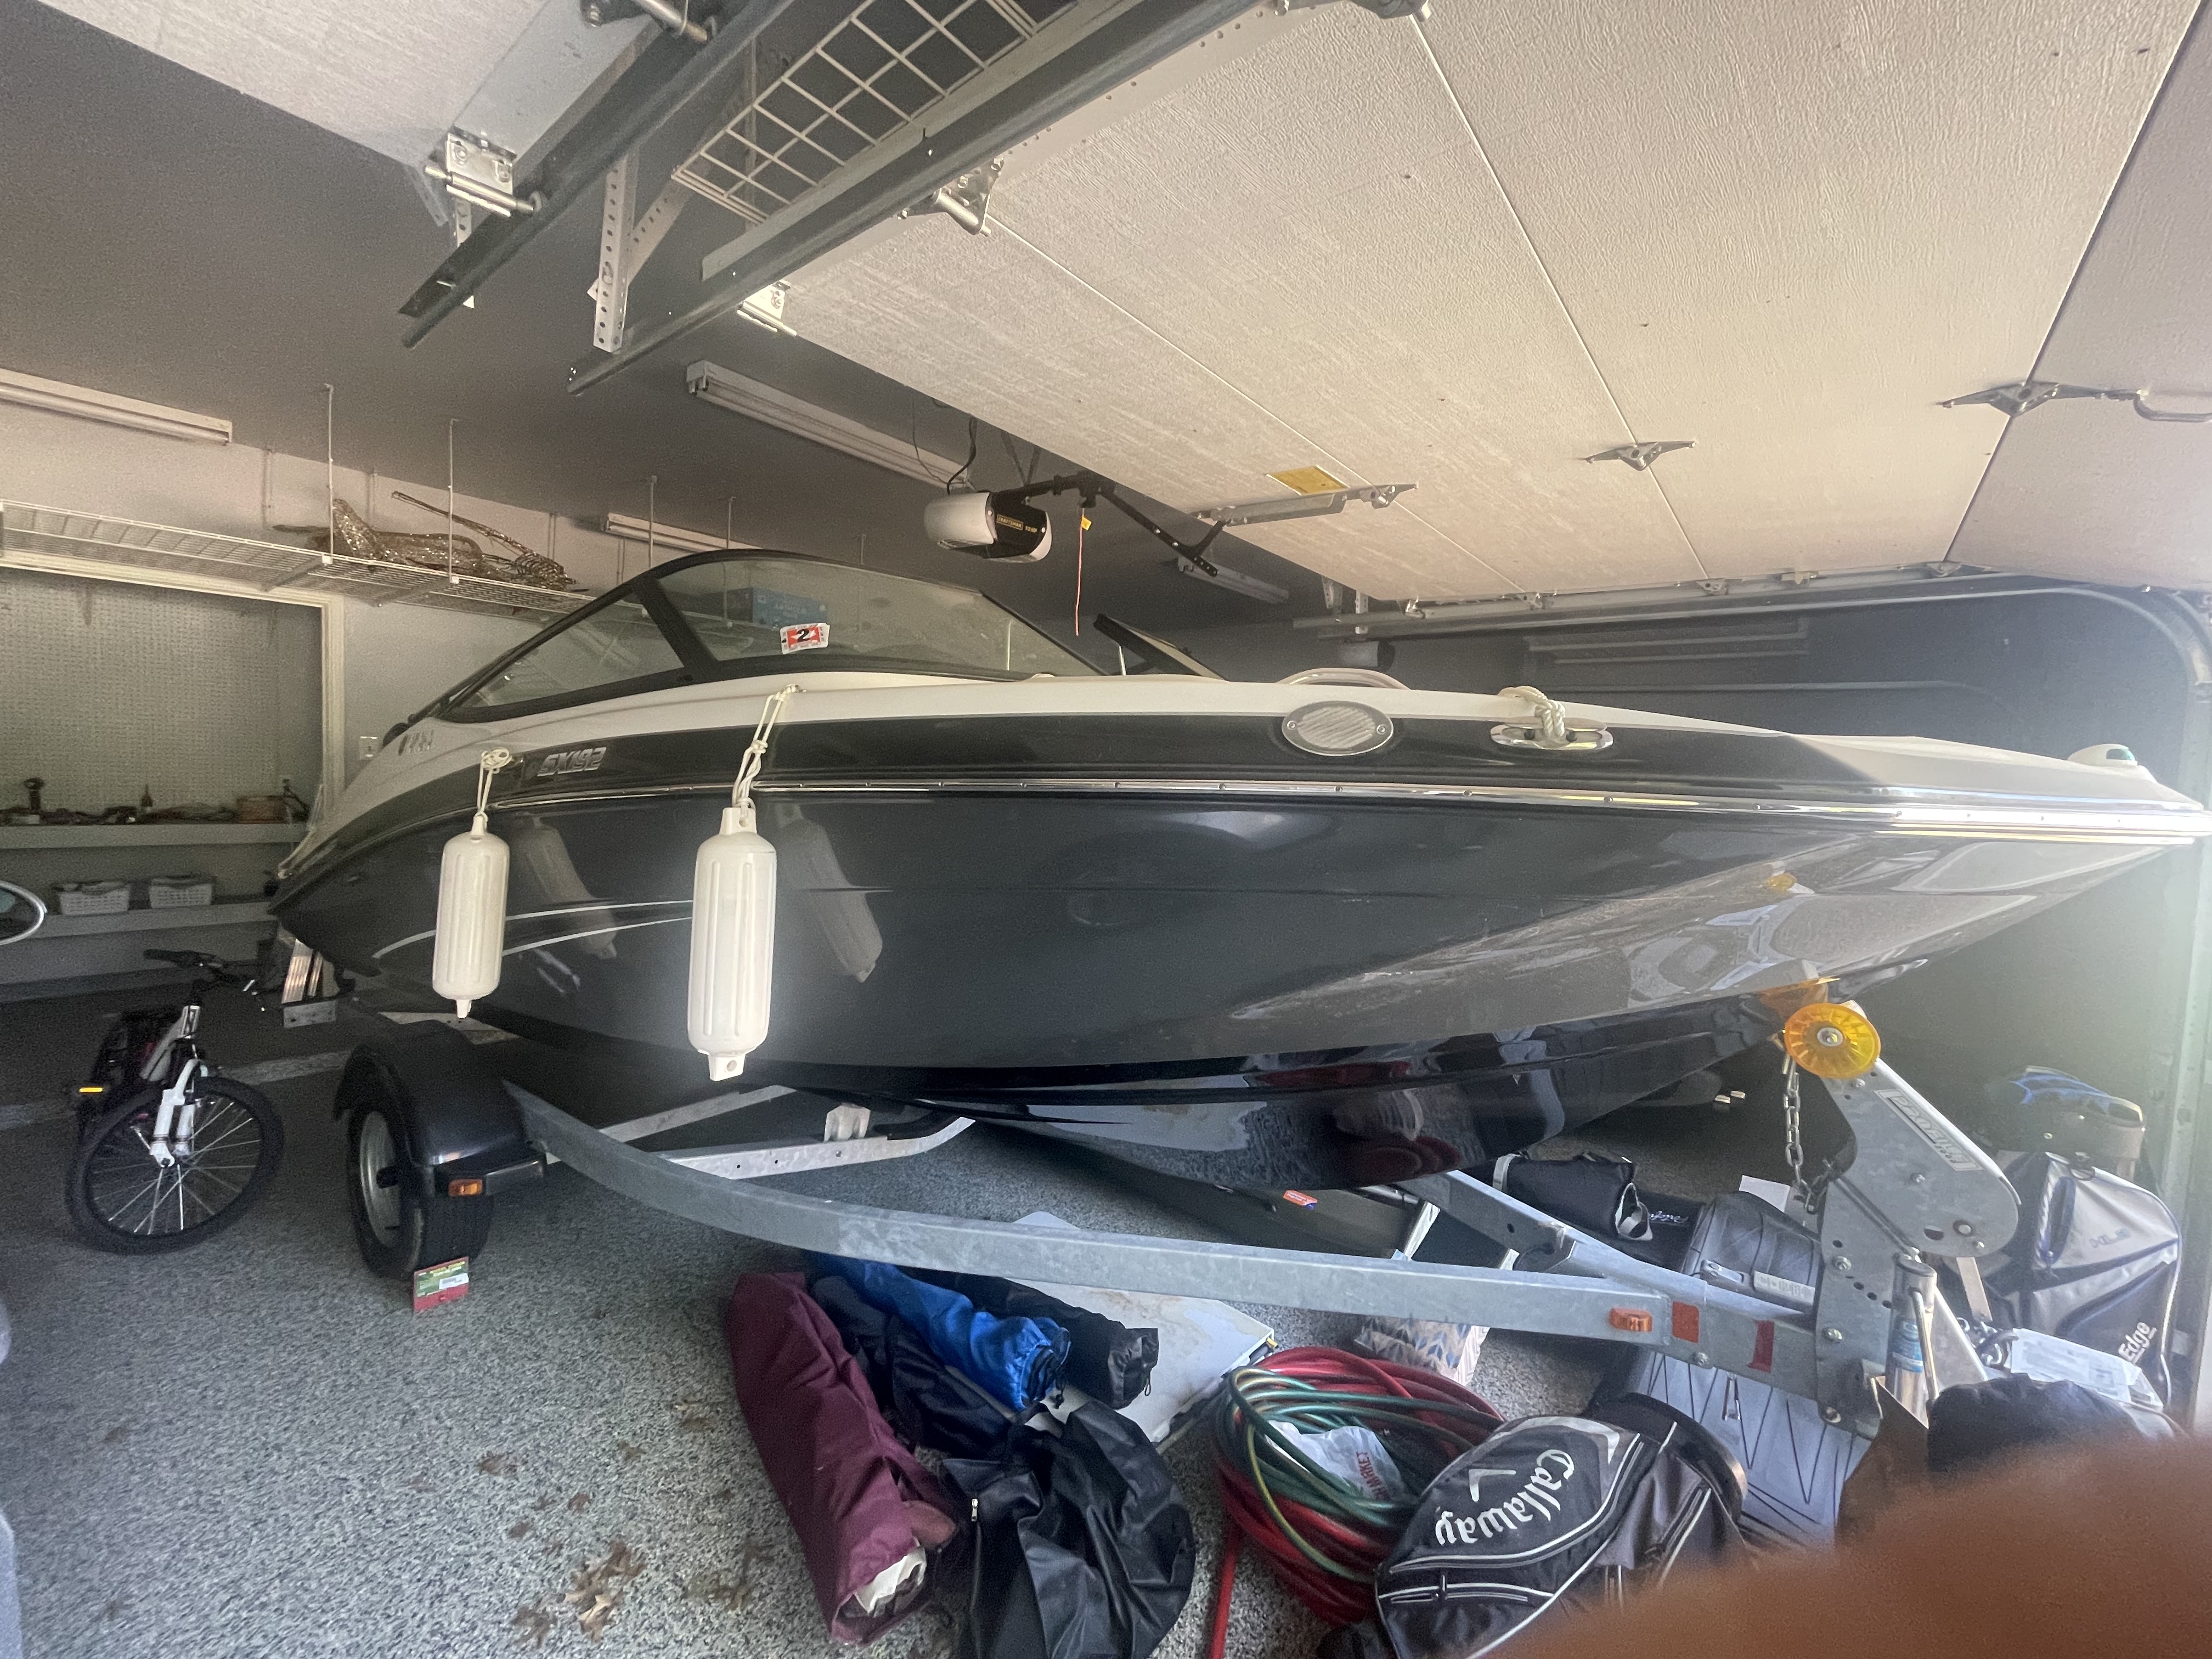 2014 Yamaha SX192 Power boat for sale in Dallas, TX - image 5 